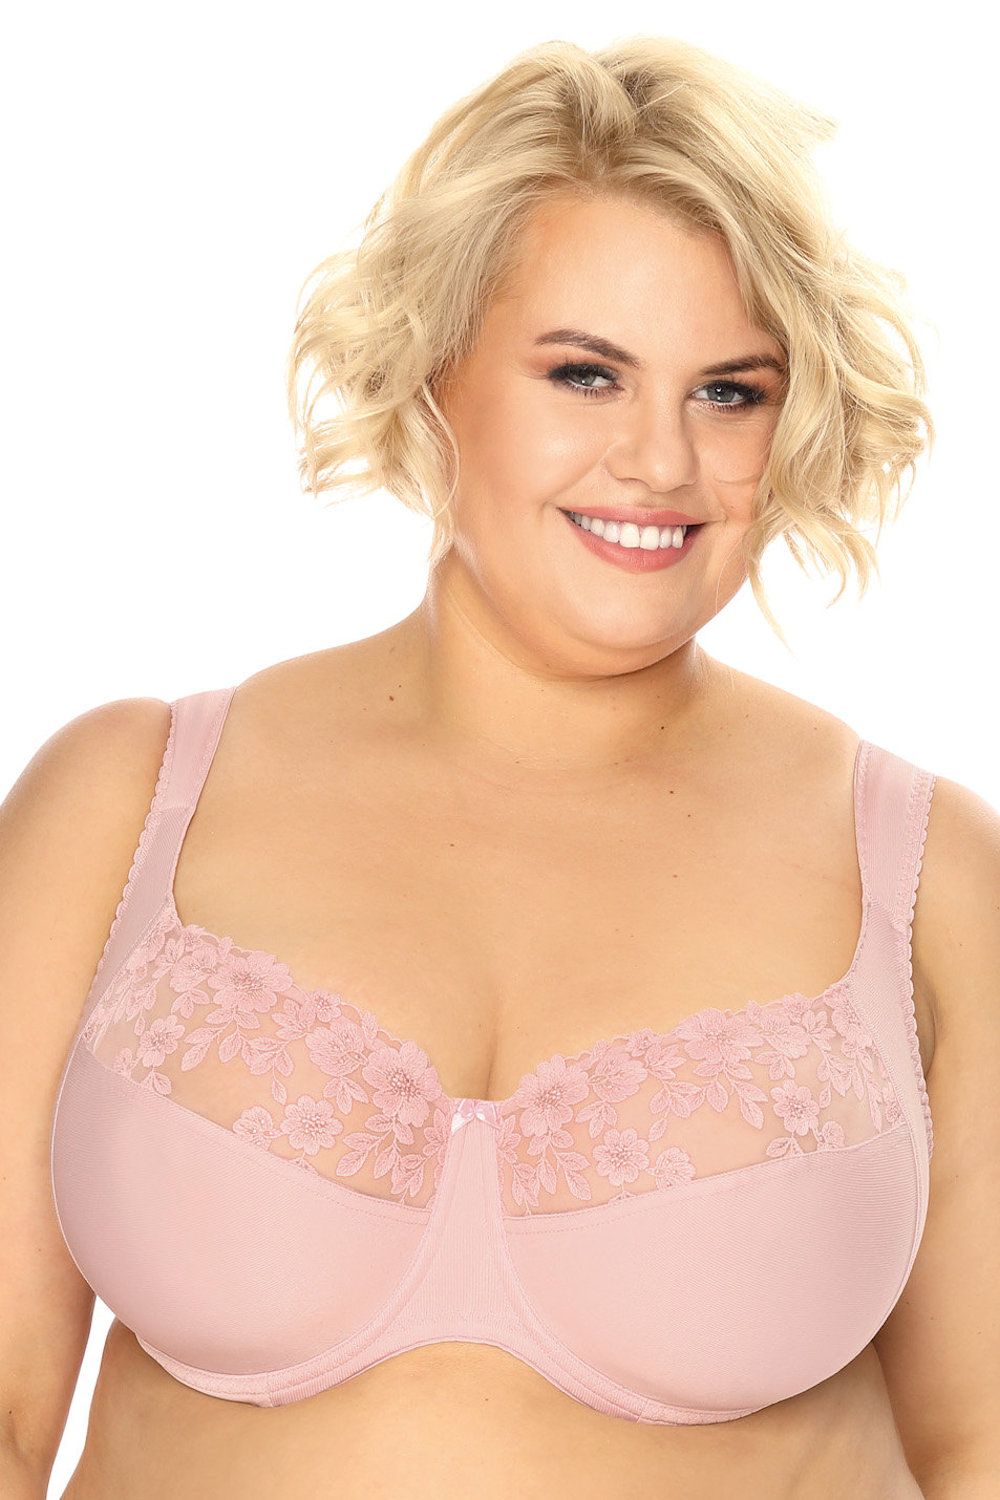 Null Cup Size GG Bras, Lingerie